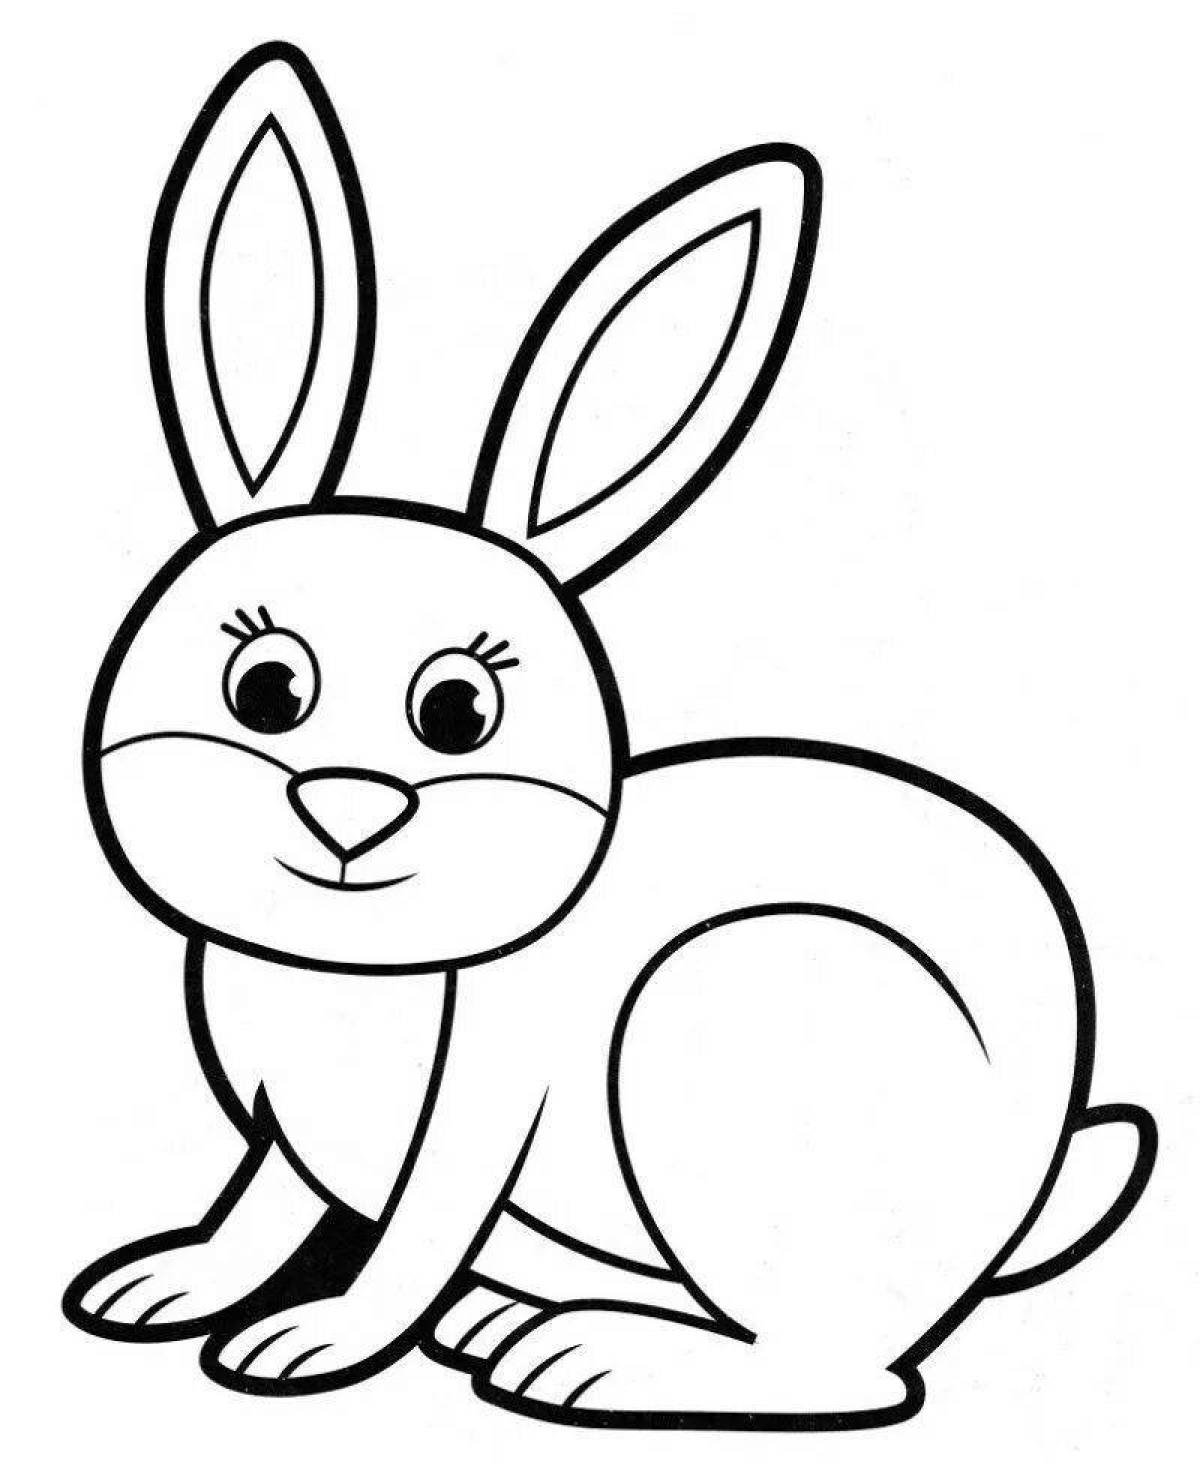 Colorful hare coloring for kids